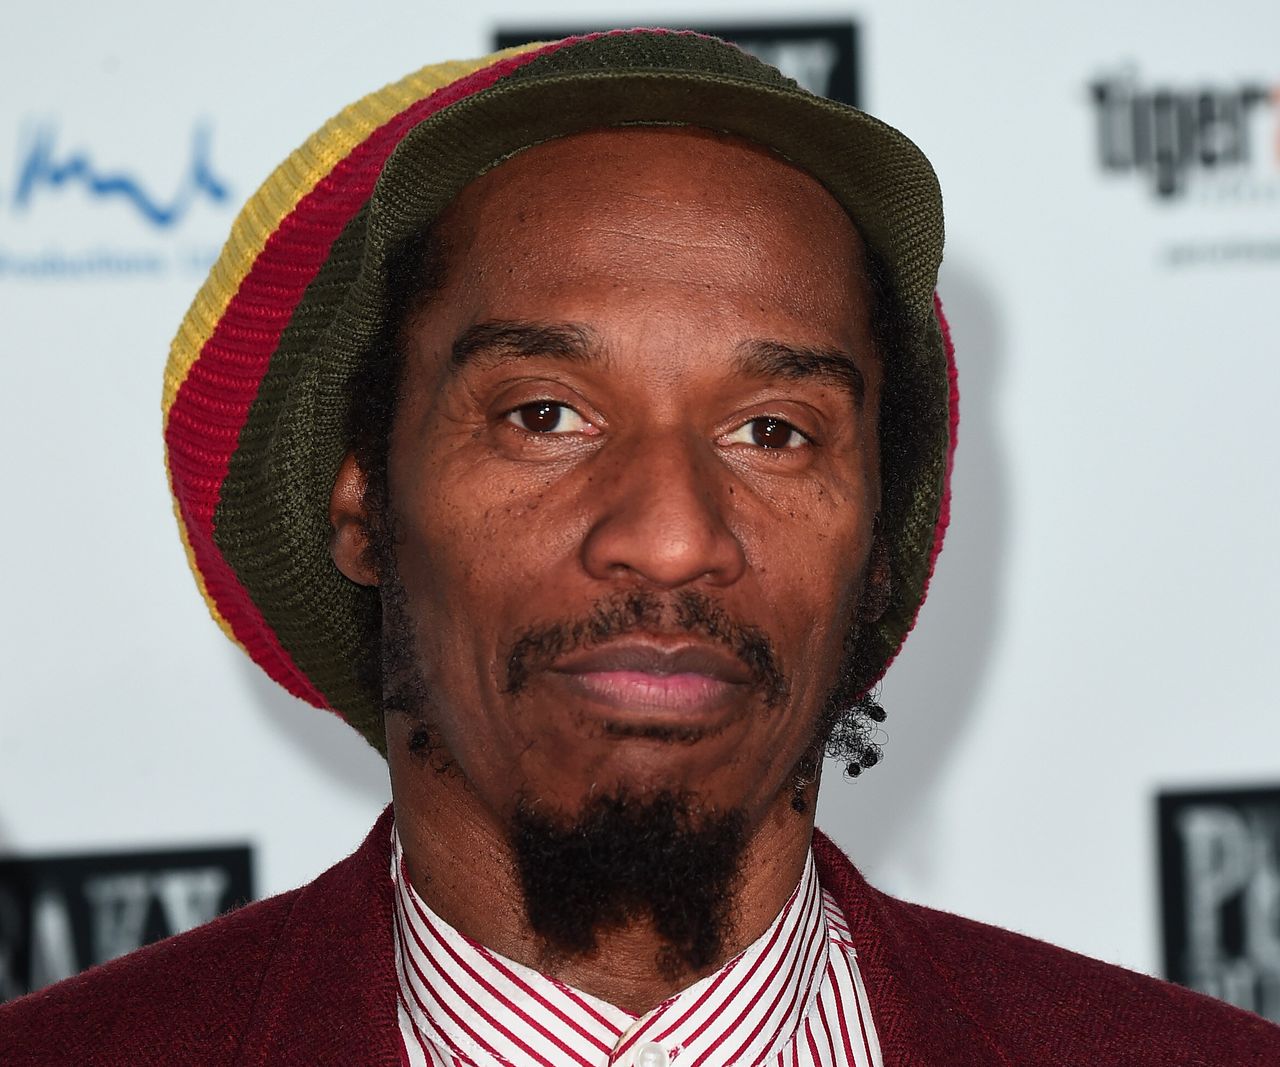 Zephaniah attends the Birmingham premiere of TV show Peaky Blinders, in which he plays the character of Jeremiah Jesus, in 2017